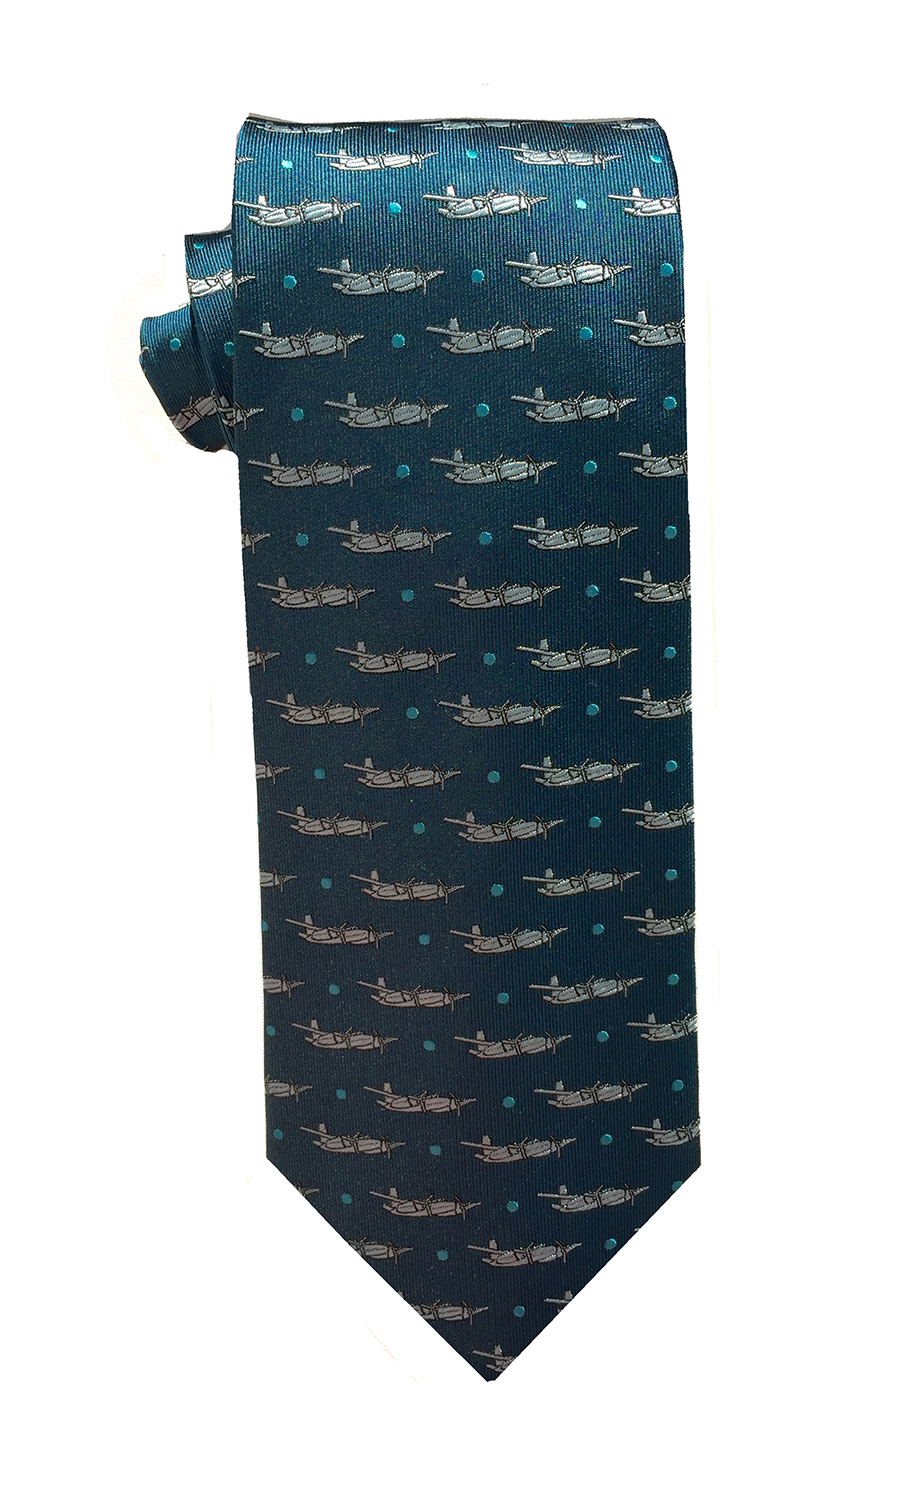 A-26 Invader airplane tie in teal